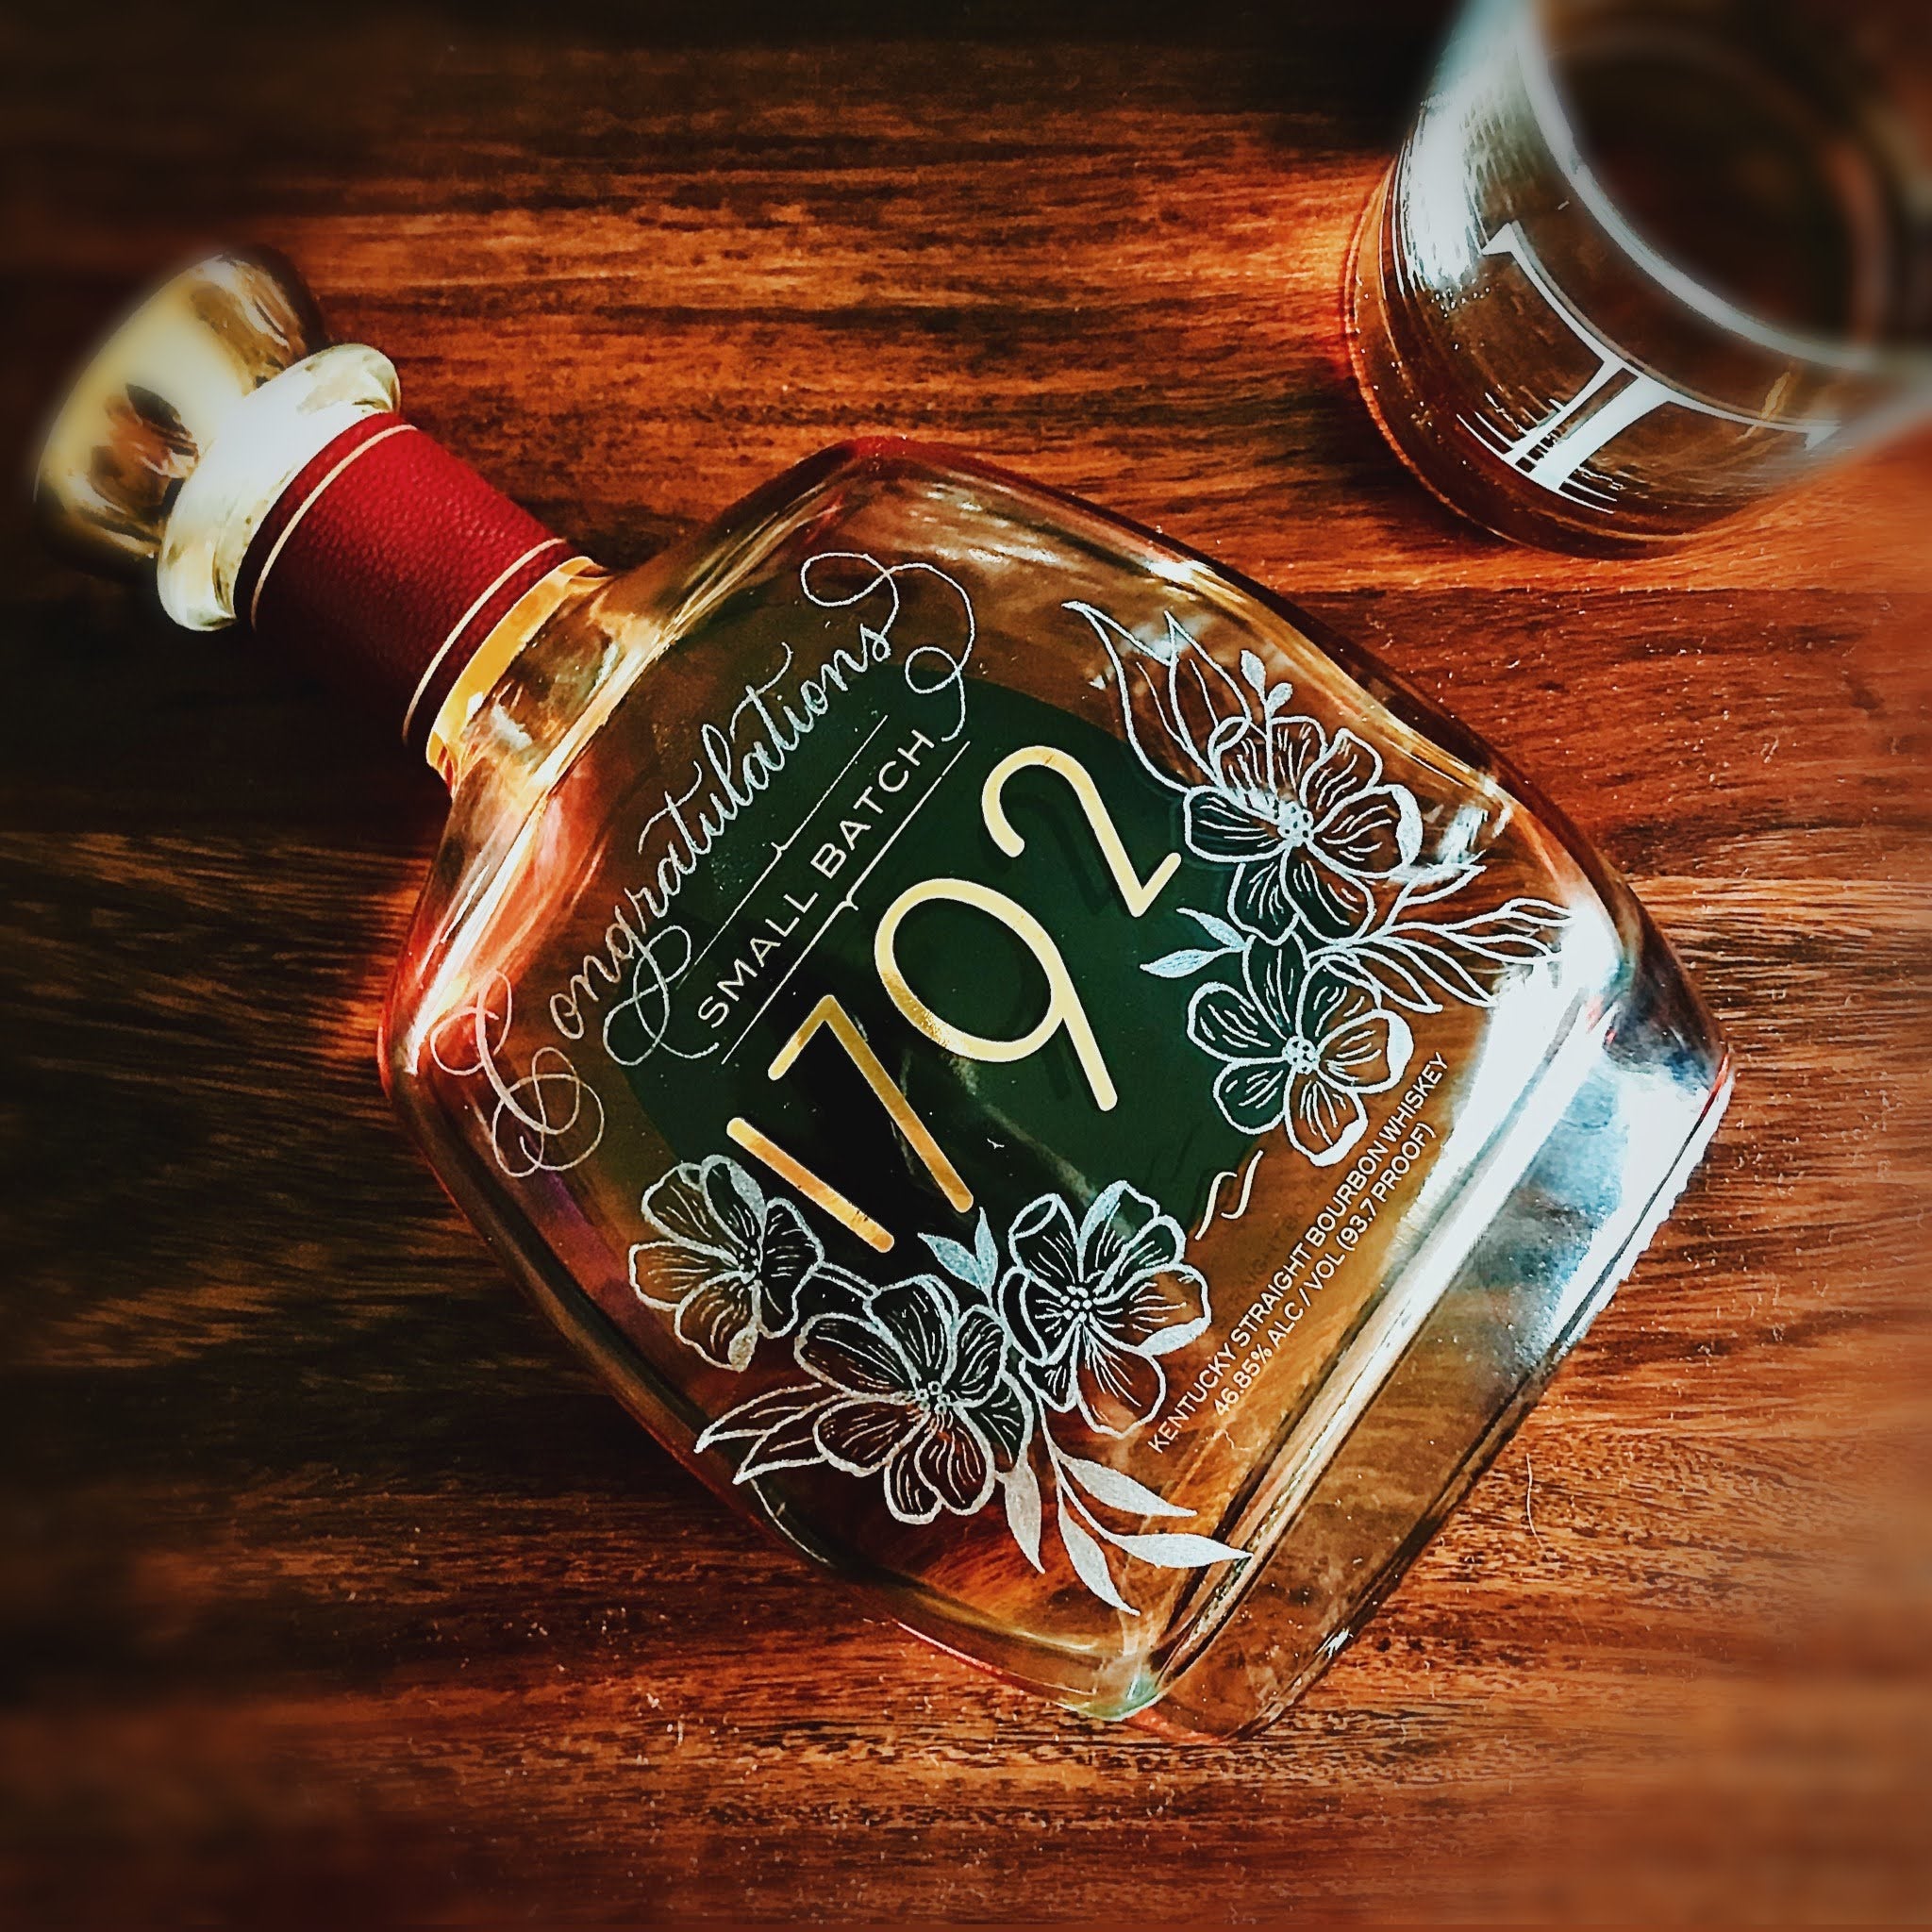 Small Batch 1792 Whiskey Bourbon bottle engraved with the word "Congratulations" on top and surrounded with modern florals.